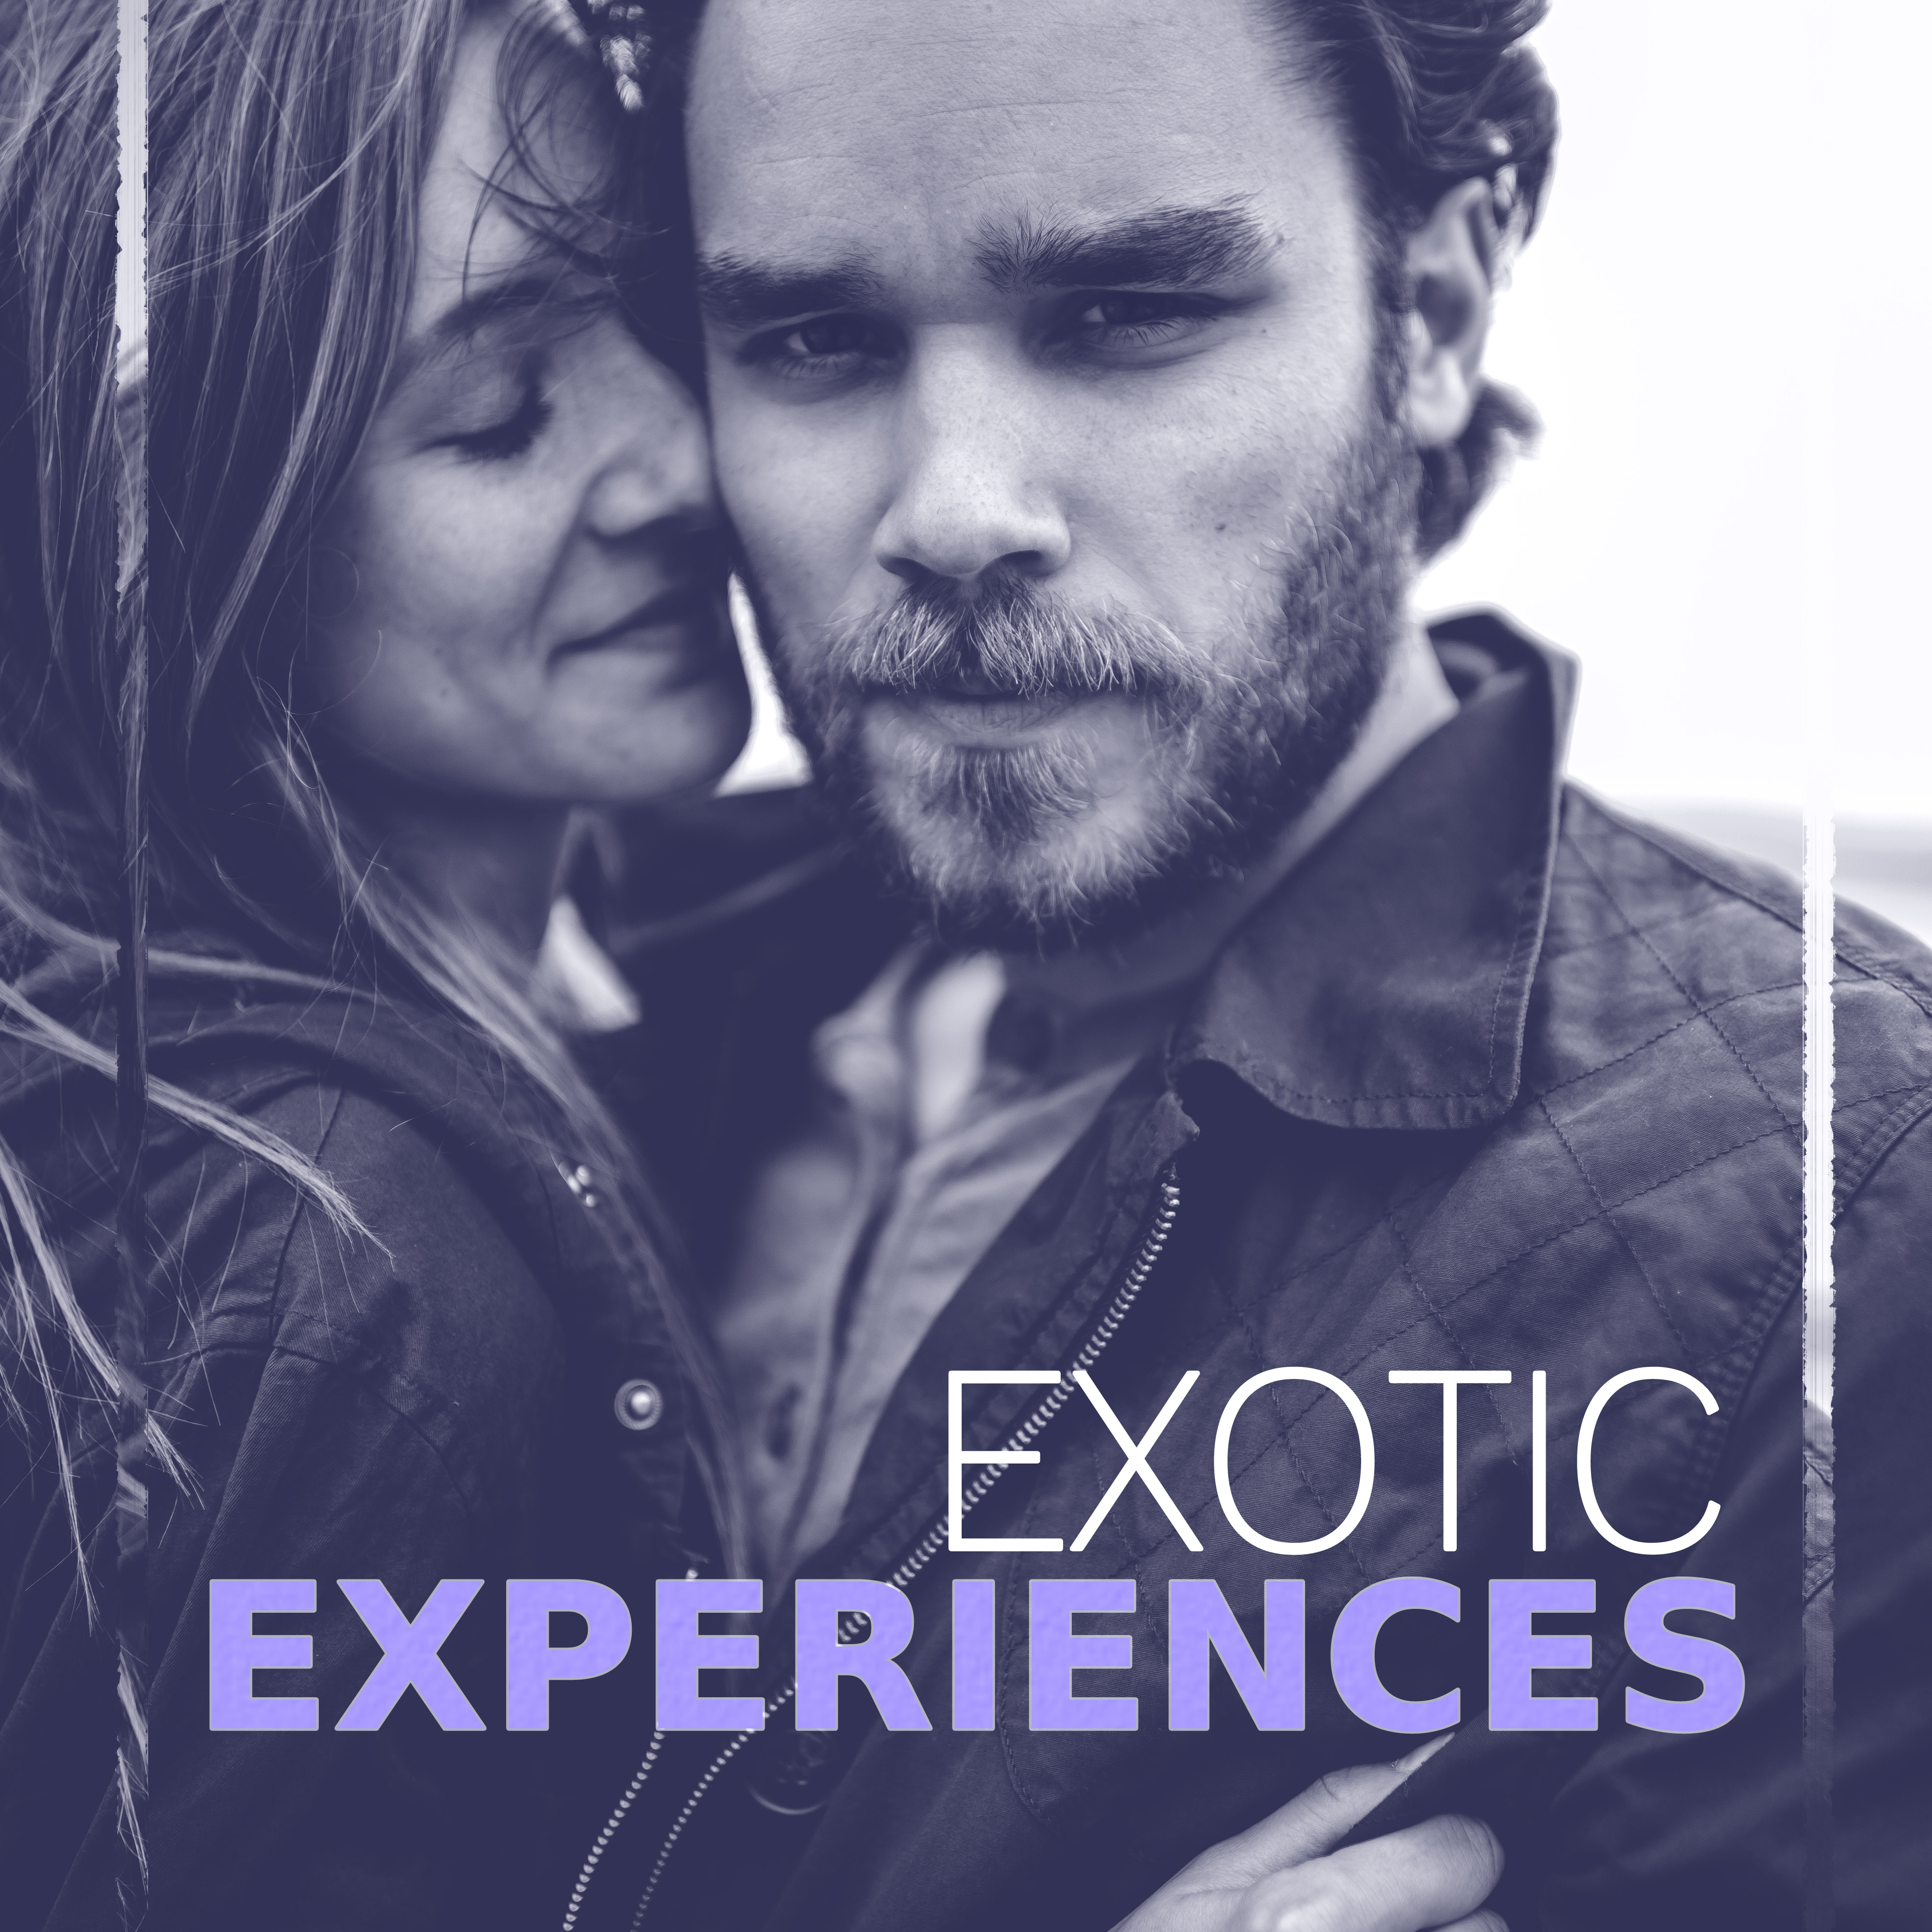 Exotic Experiences - Romantic Confession, Suggestive, Wet, Romantic, Kiss, Intoxicated, Desire, Wish, Red, Gray, Different Behaviors